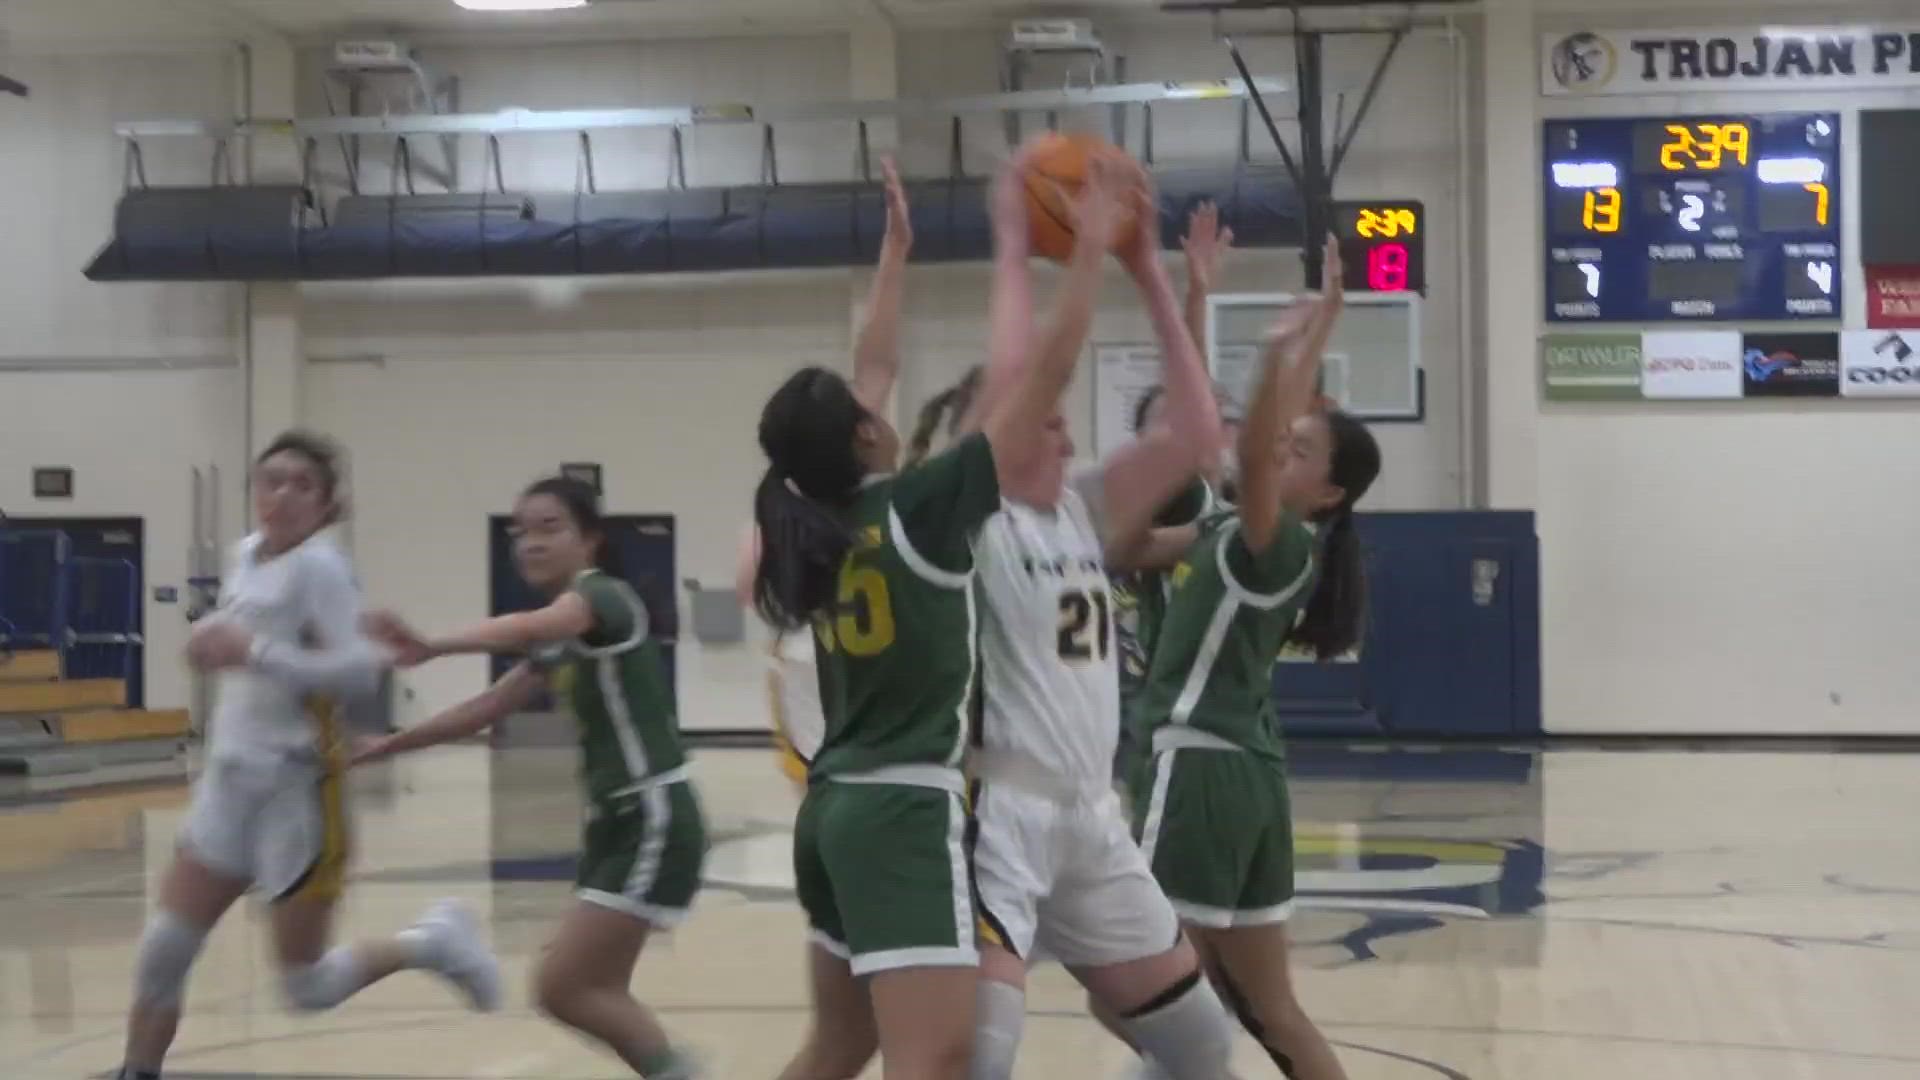 The Oak Ridge Trojans girl's basketball team have secured their place in the quarter finals.